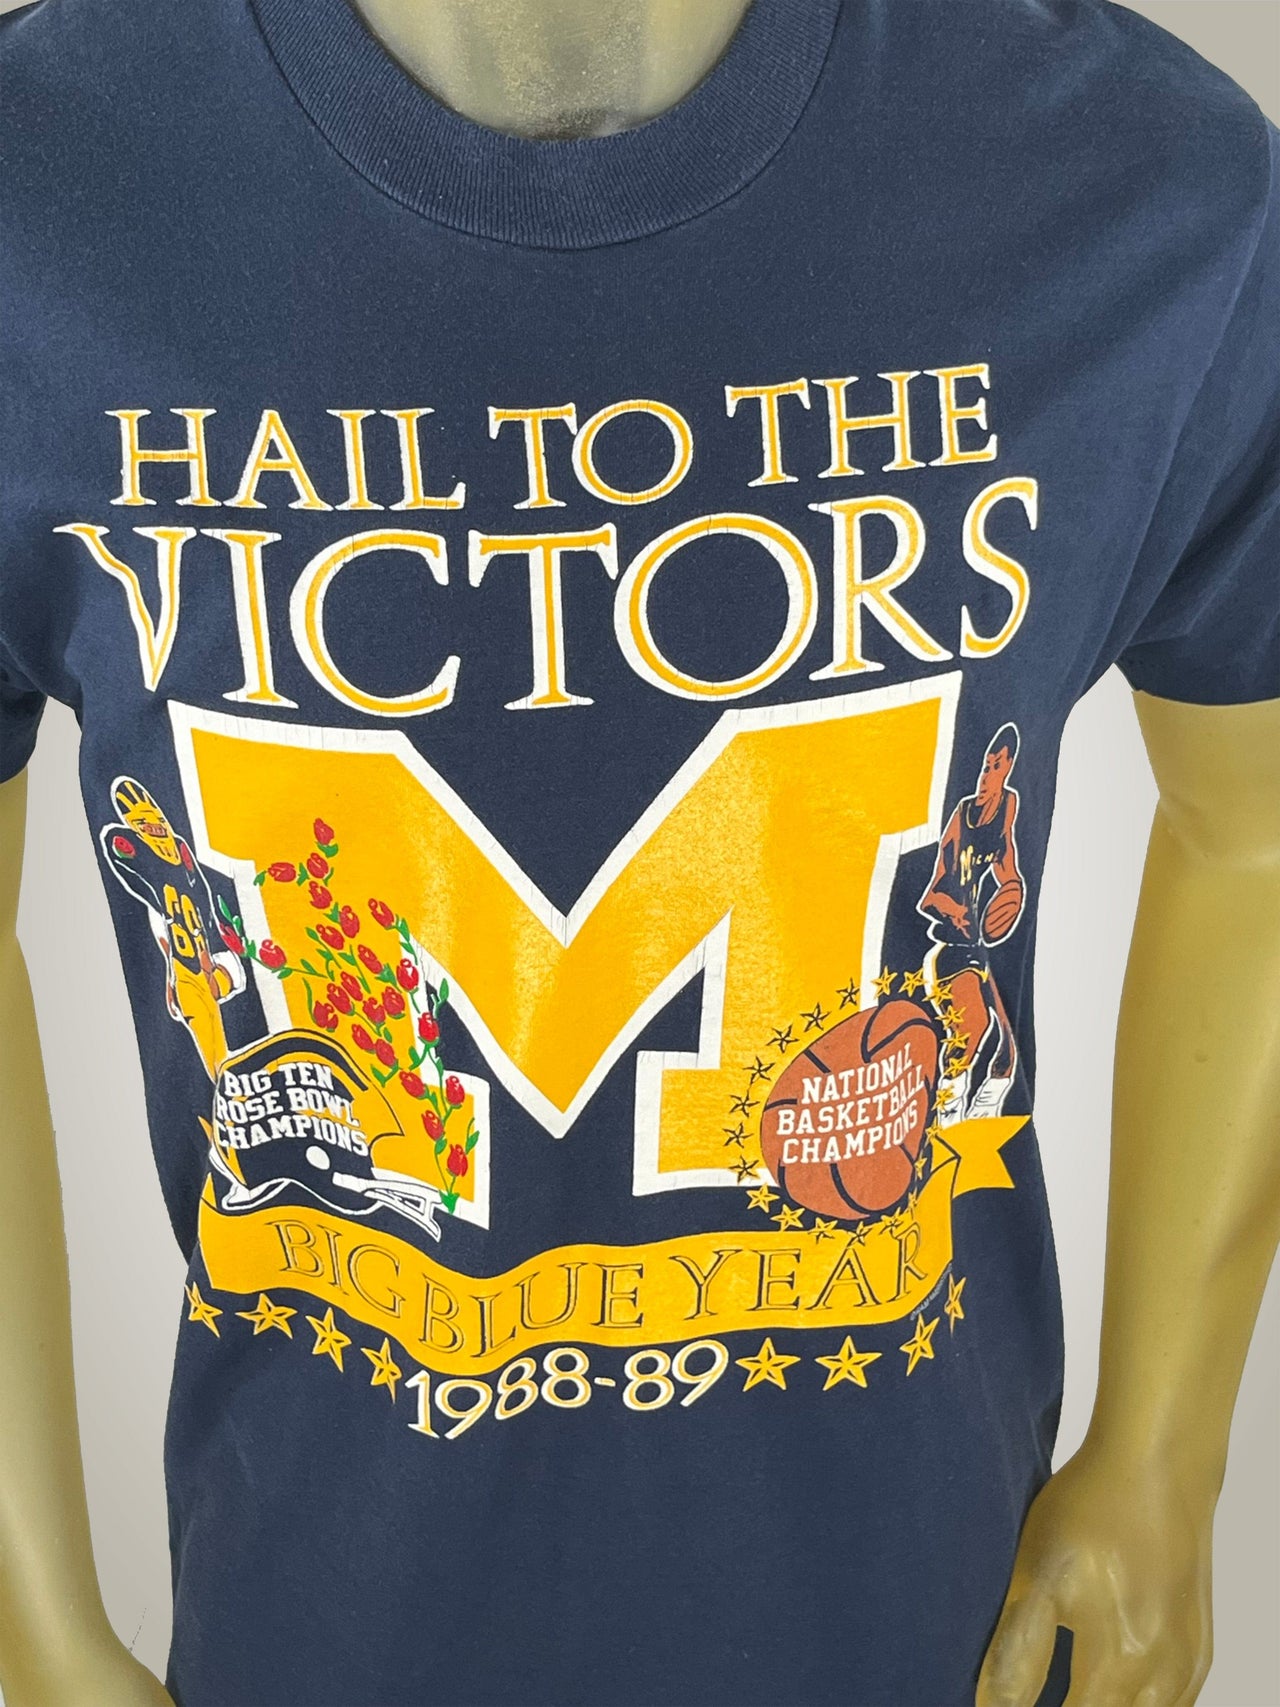 Gameday Grails T-Shirt Large Vintage Michigan Wolverines 1988-89 Hail to the Victors T-Shirt